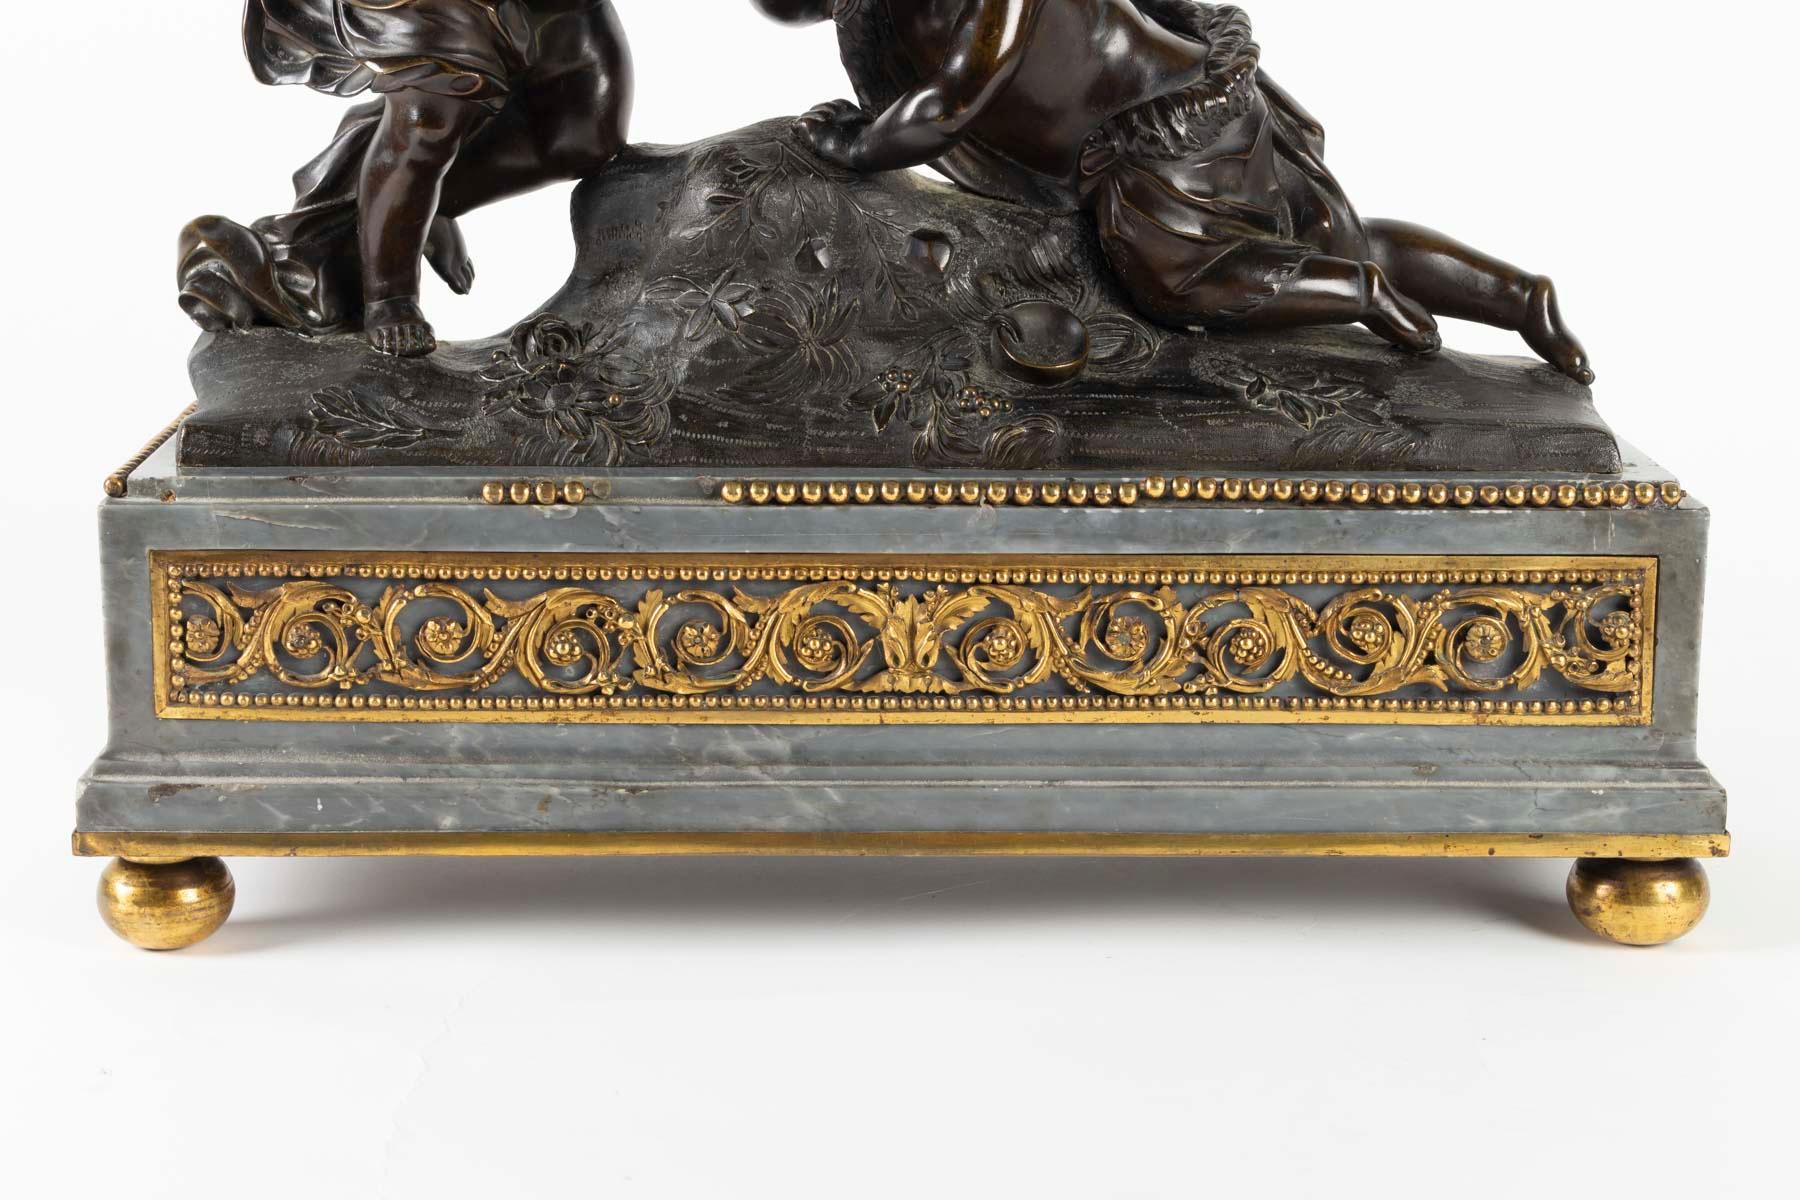 French Bronze Sculpture from the 18th Century, from the Louis XVI Period